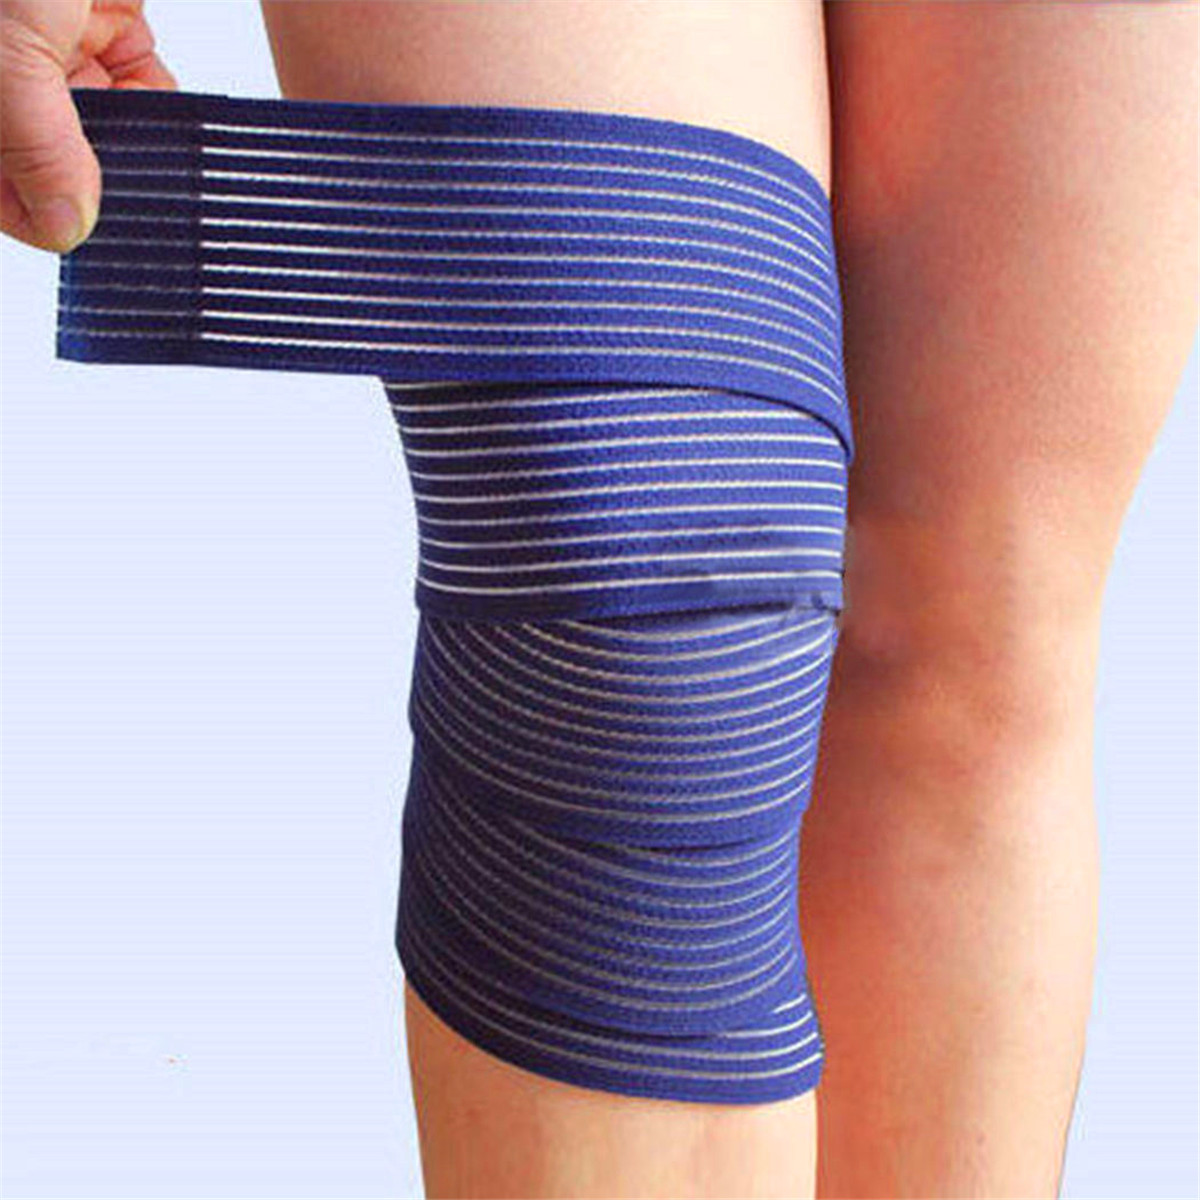 Elastic-Sports-Bandage-Knee-Pad-Support-Wrap-Knee-Band-Brace-Elbow-Calf-Arm-Support-950117-5